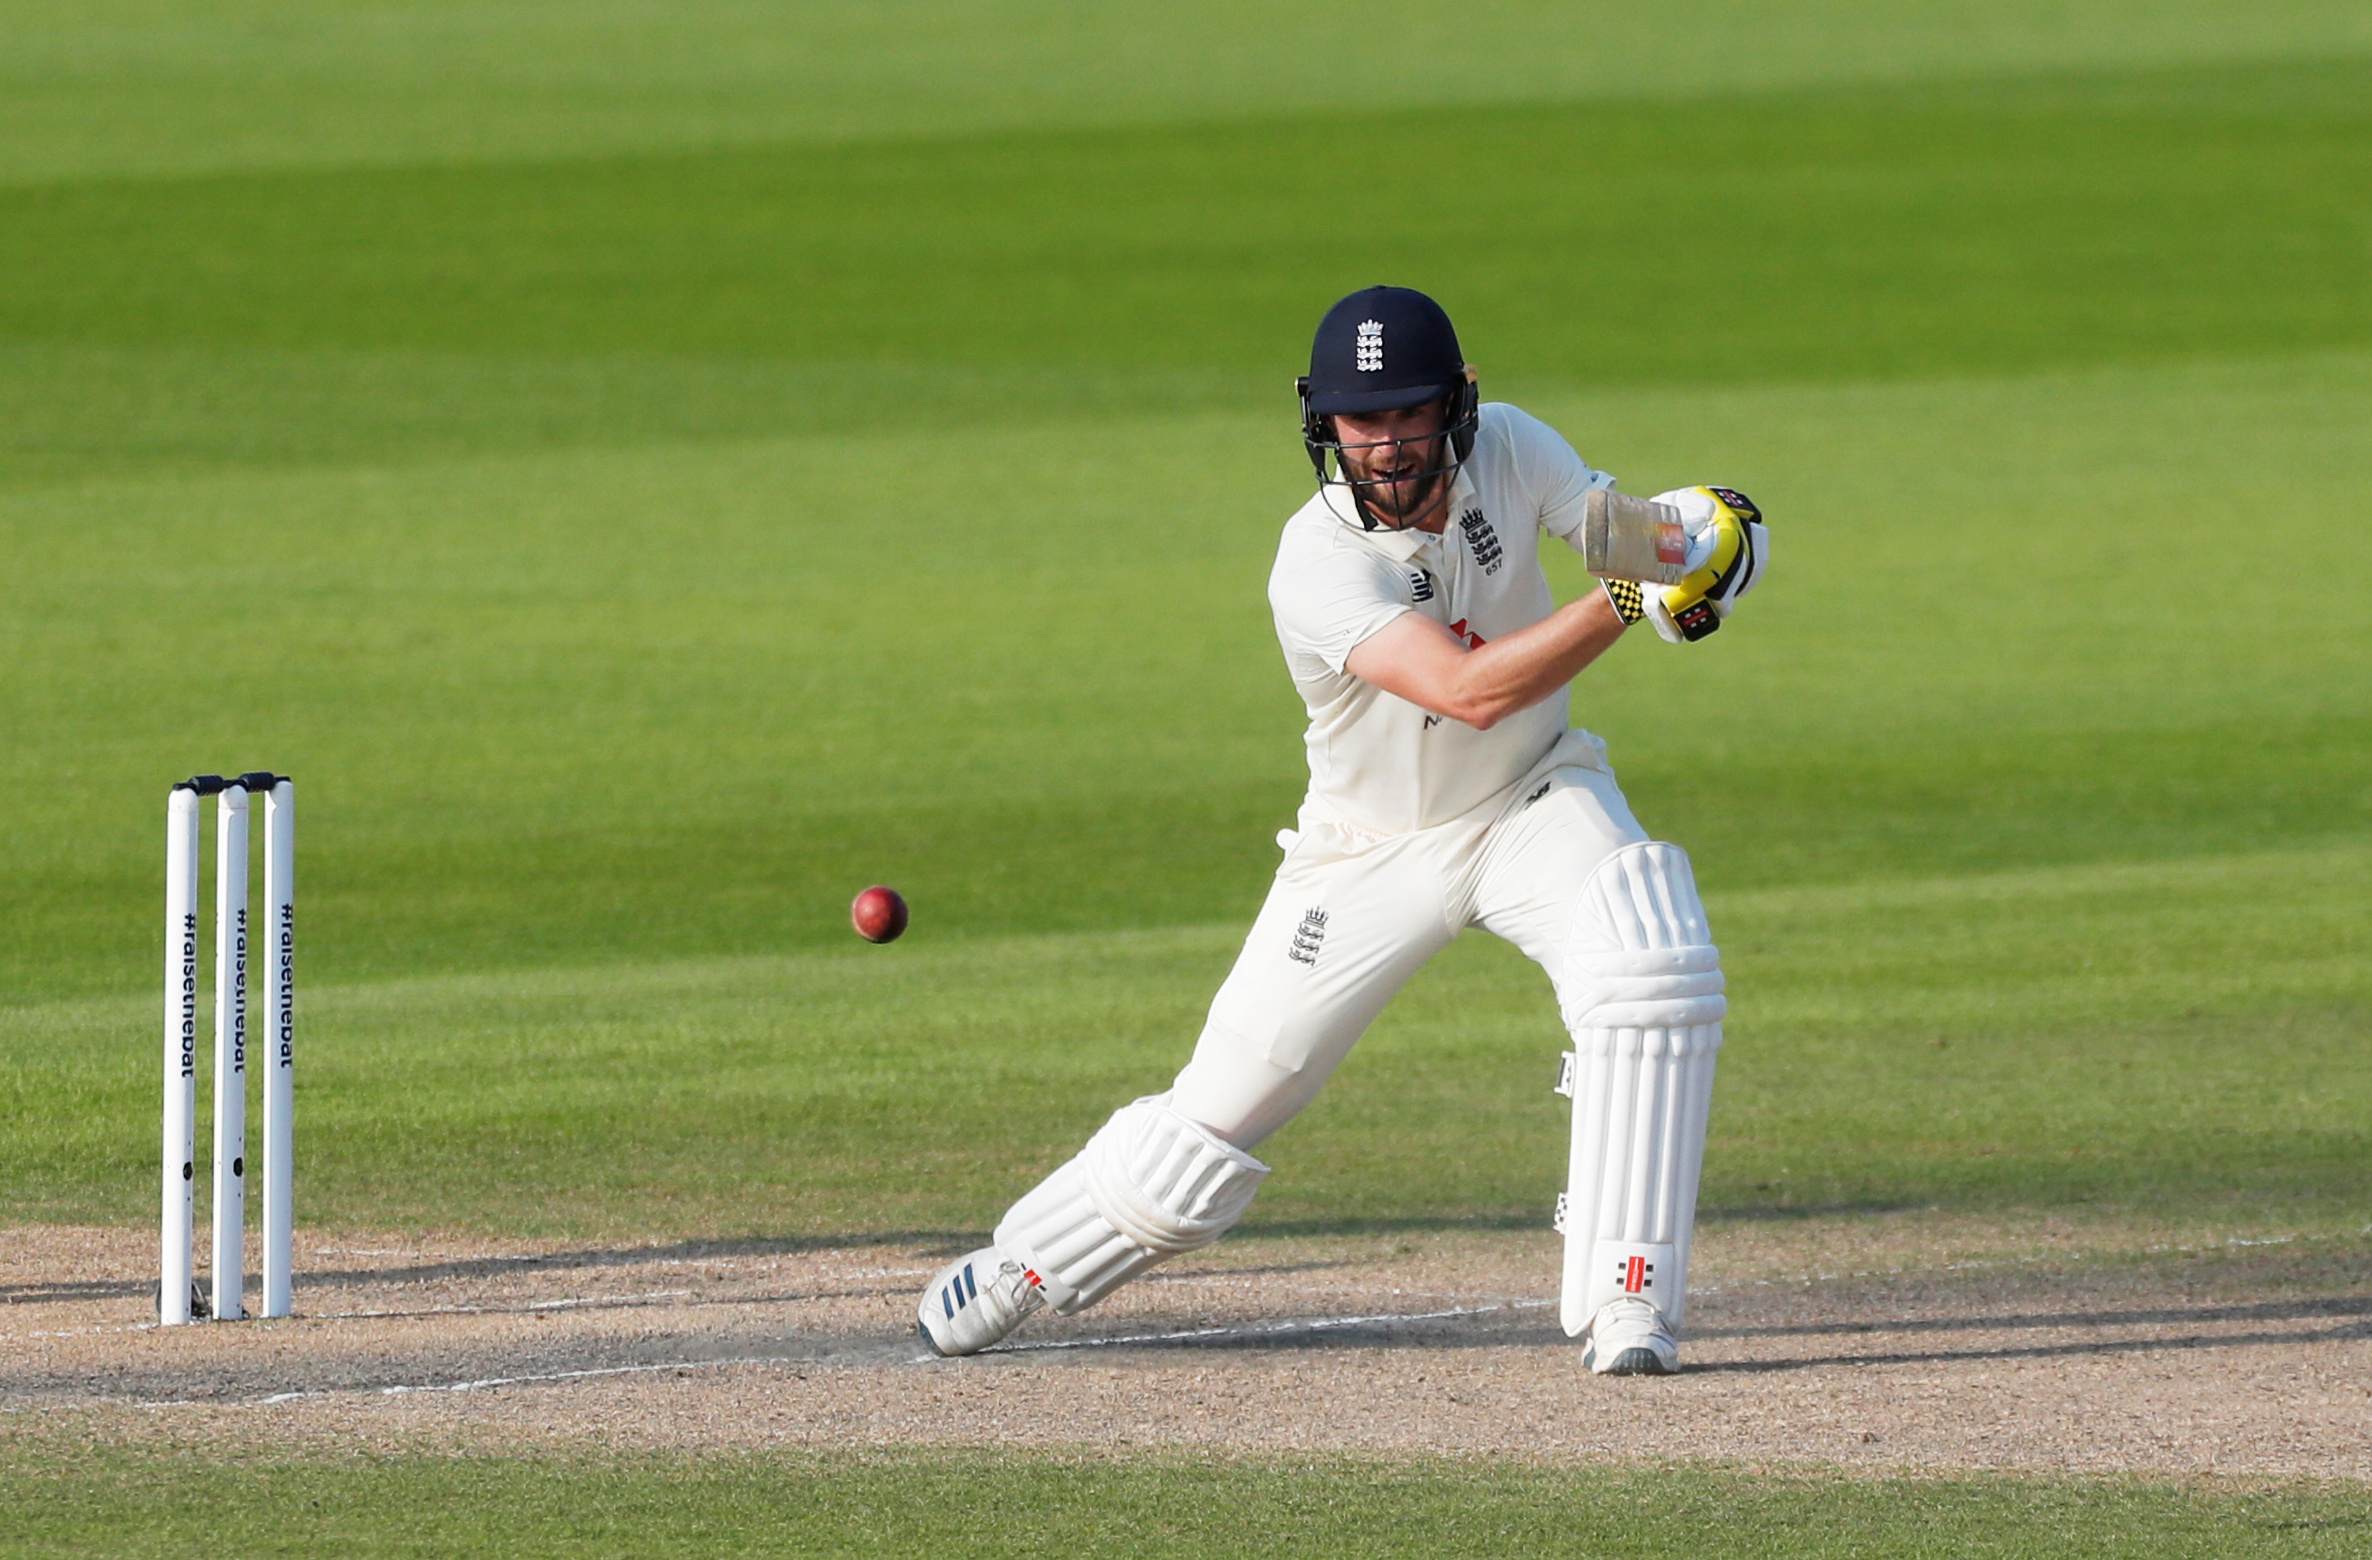 England's Chris Woakes in action. Photo: Reuters